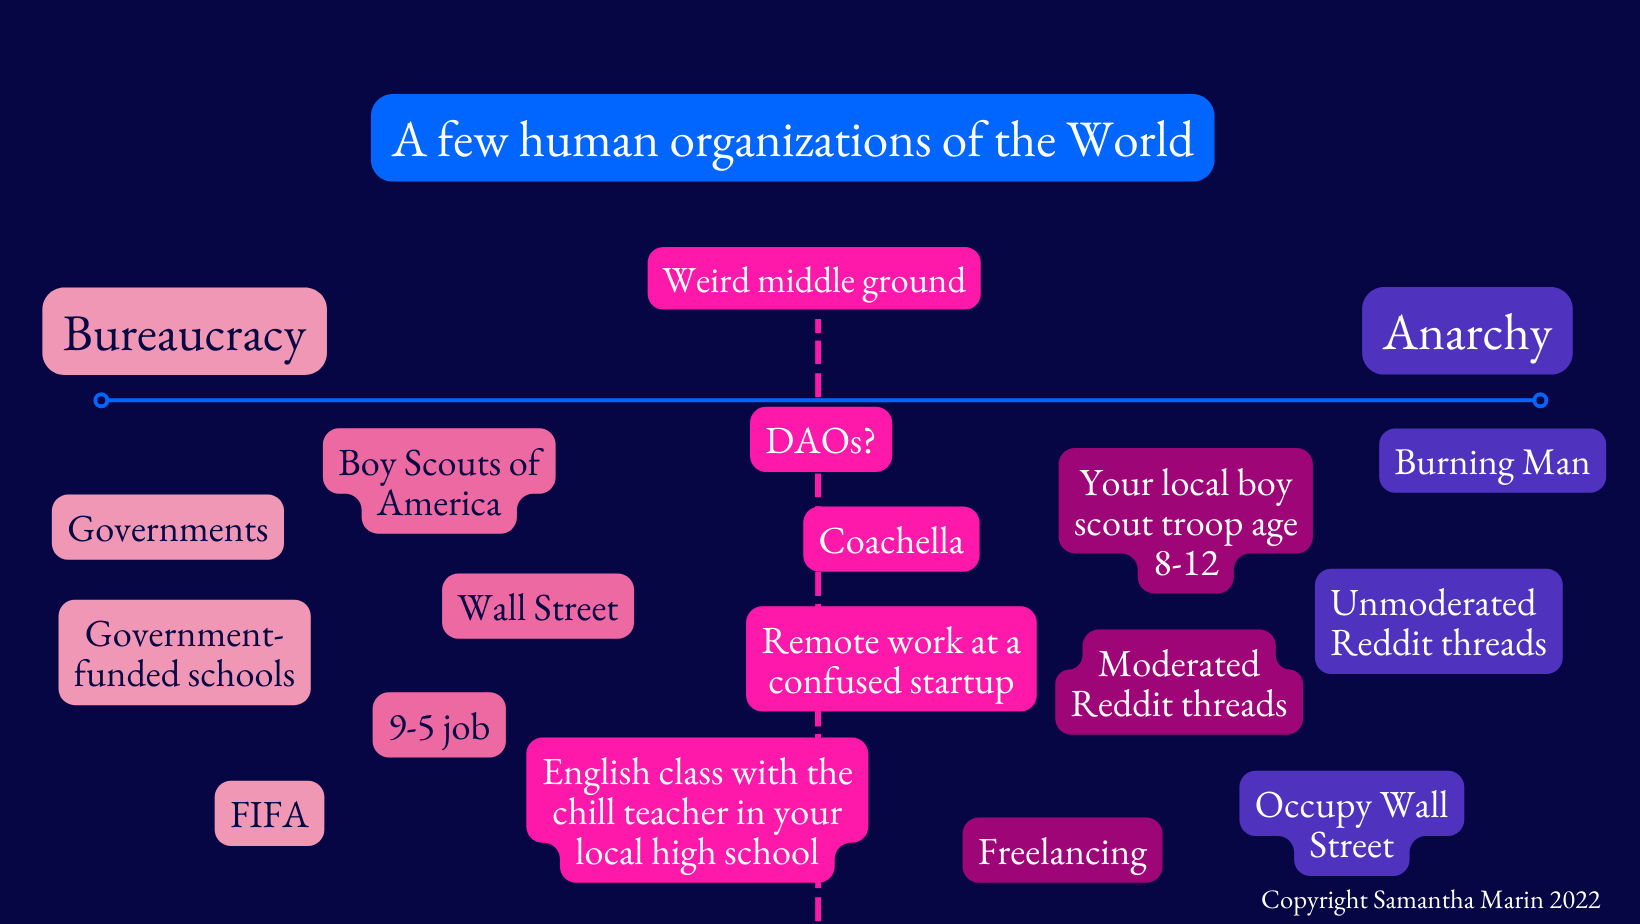 A few human organizations of the world, plotted on an X axis of Bureaucracy to Anarchy.